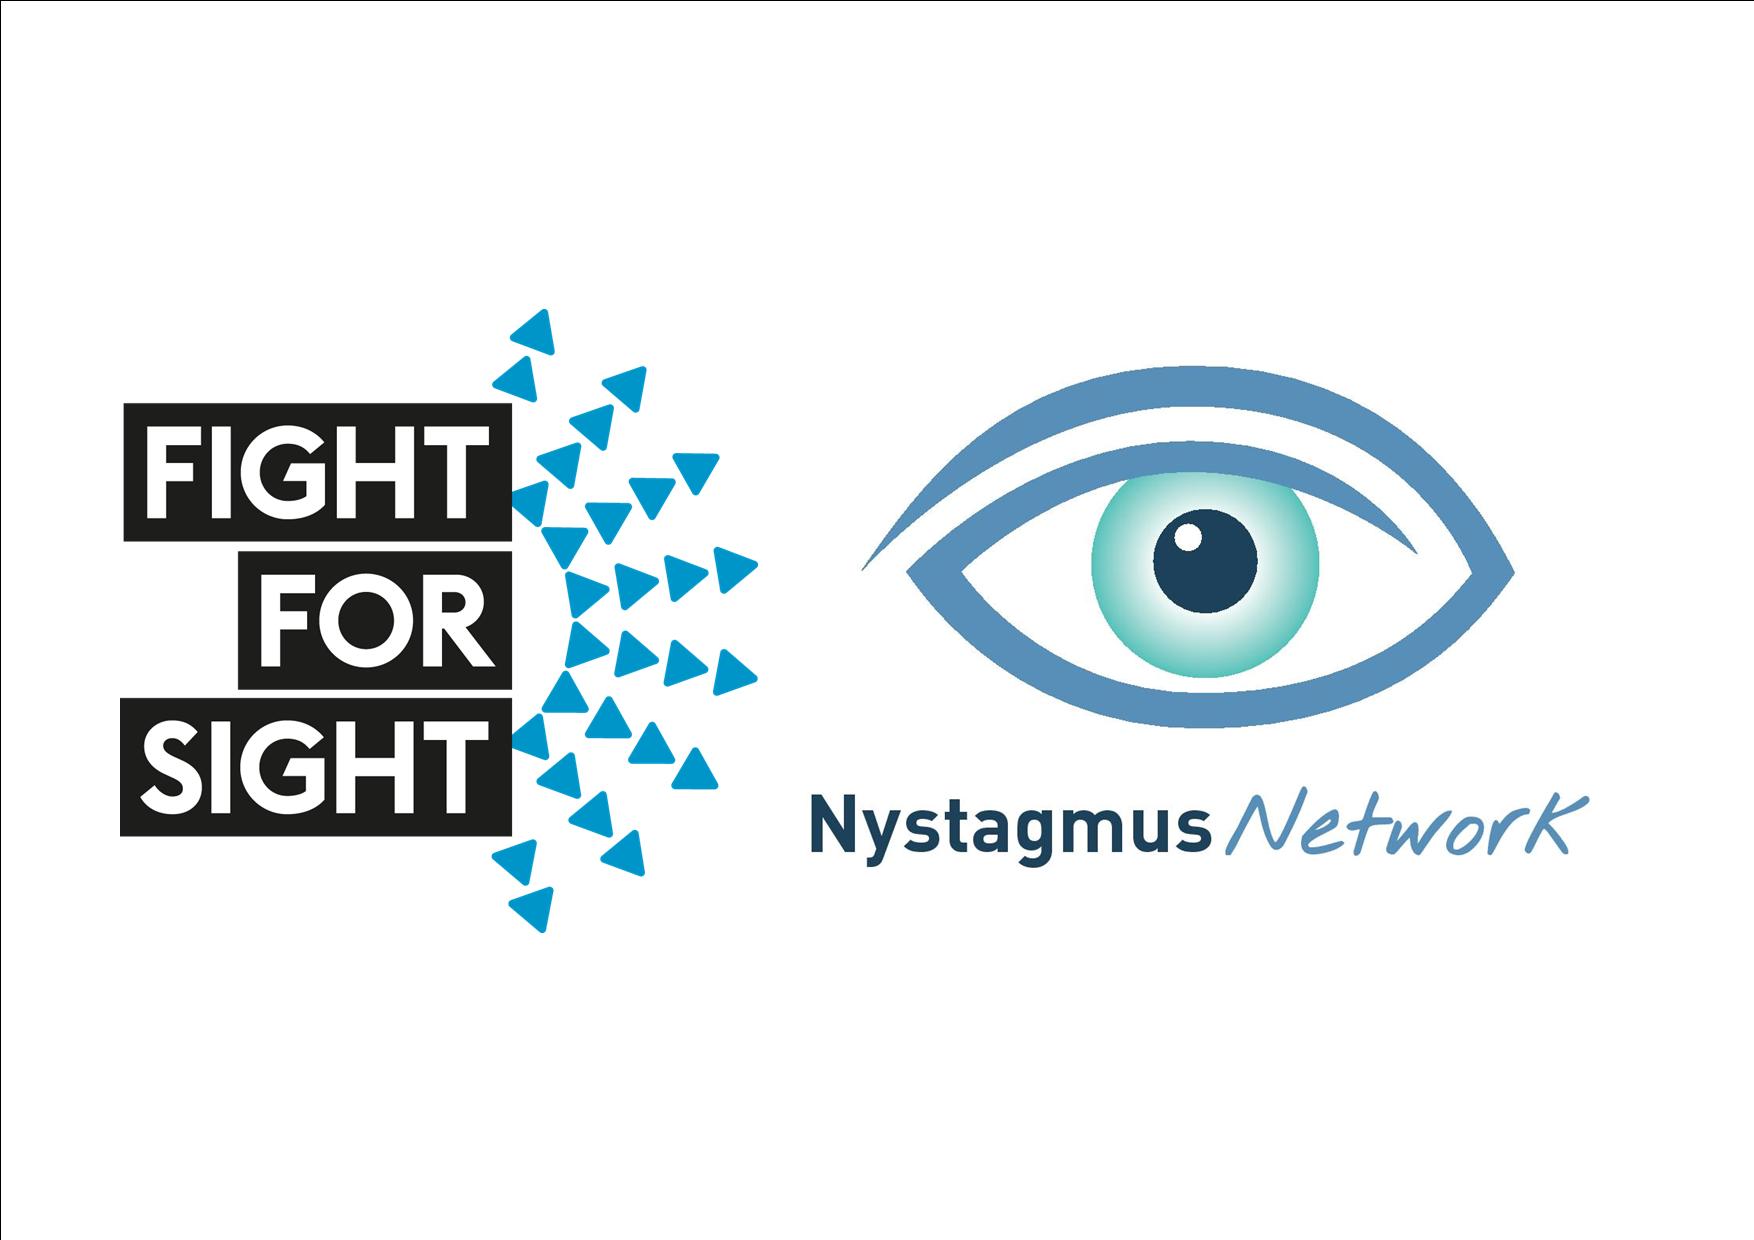 Fight for Sight and Nystagmus Network logo.